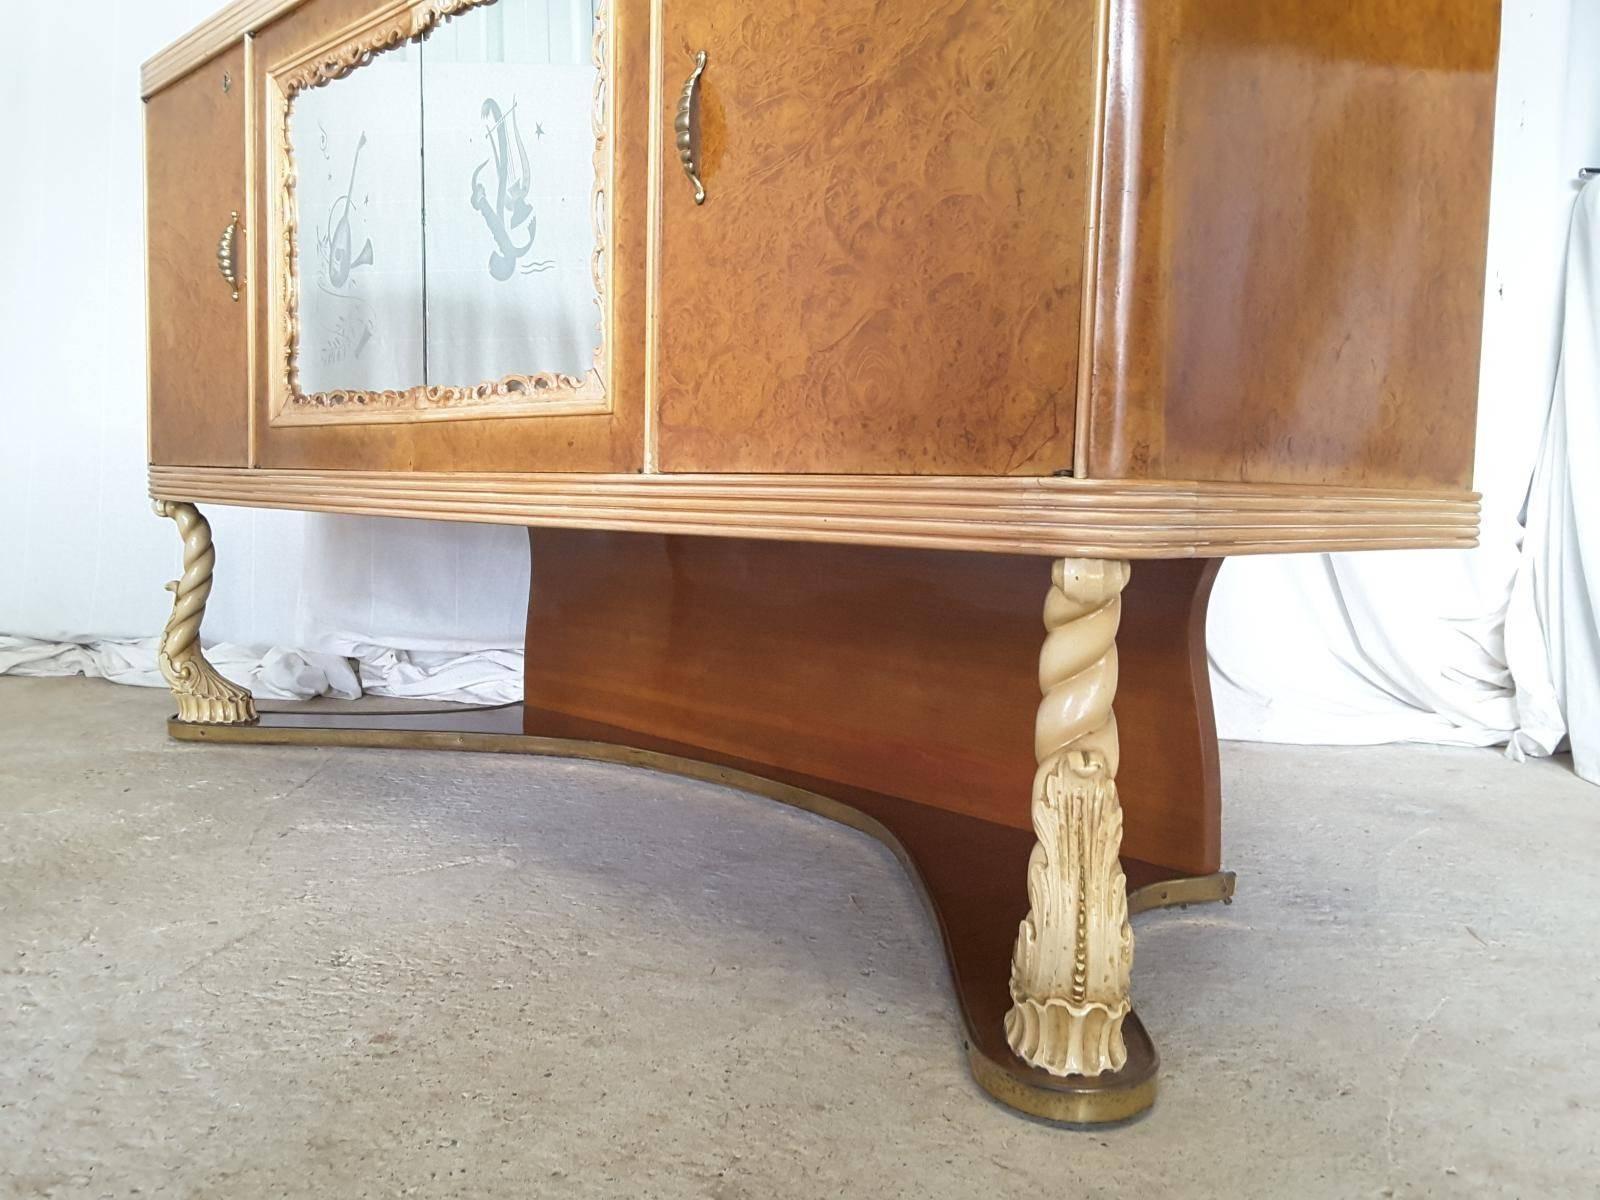 An unusual Italian mirror back sideboard designed by Pier Luigi Colli. With etched glass mirror panels to the front doors and detailed mirror back. The case is burl walnut with hand decorated cream legs and moldings.